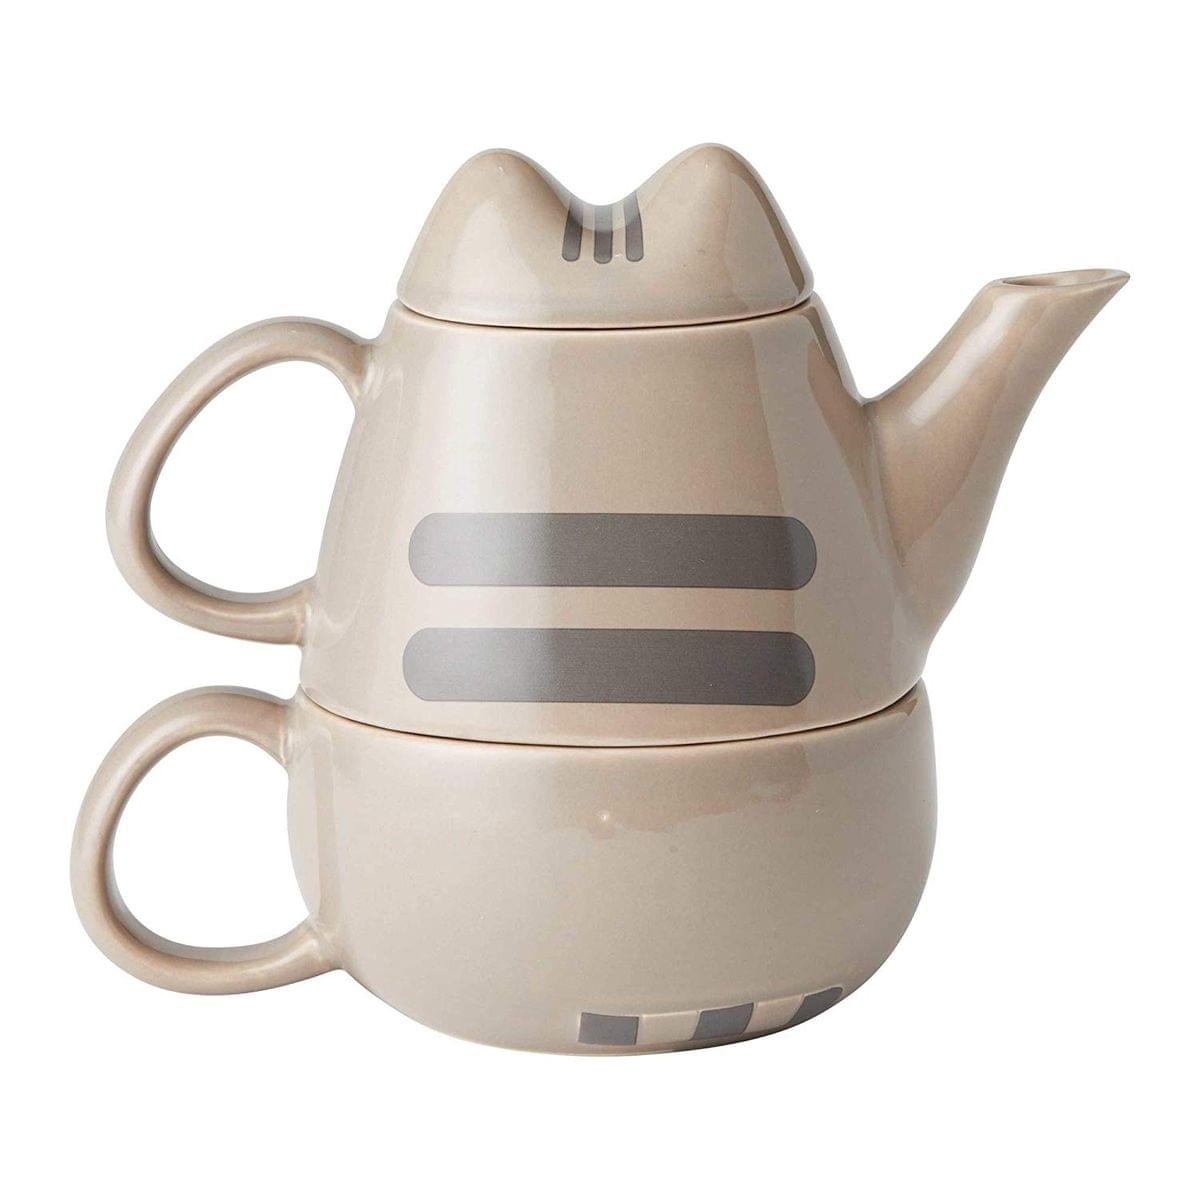 Pusheen Tea for One Set - 10oz Kettle/ Cup/ Lid